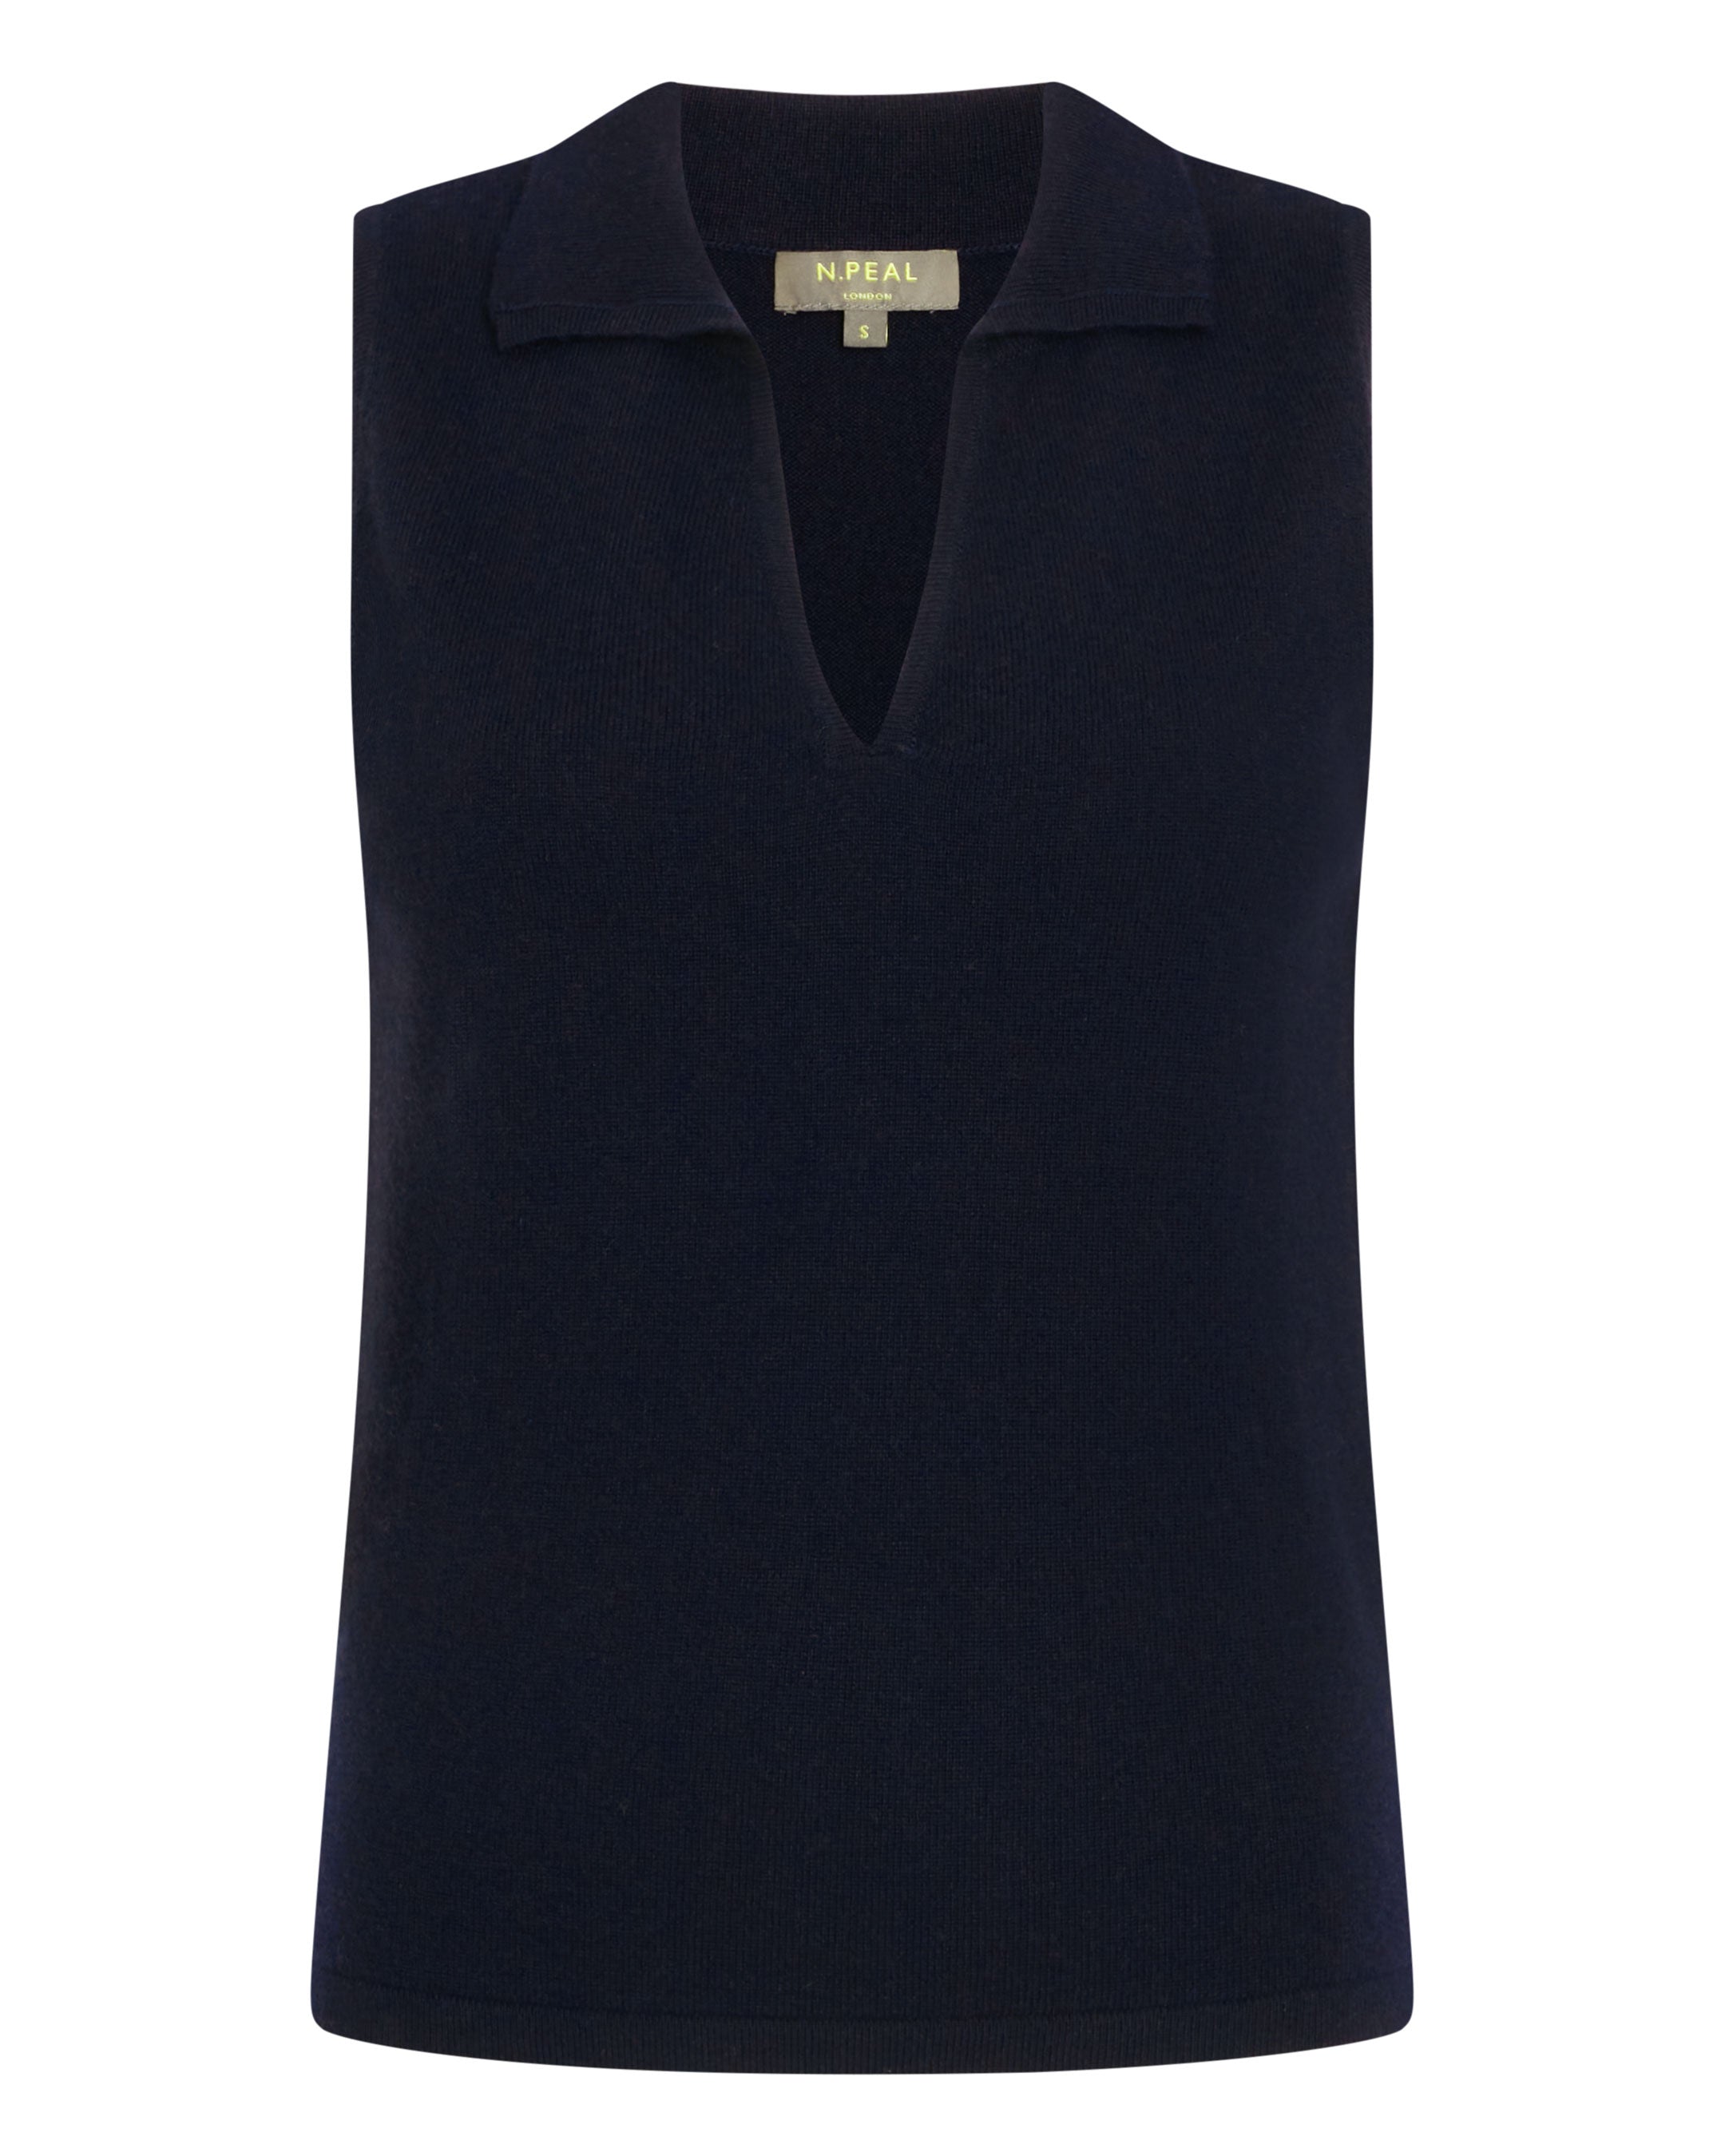 Women's Sleeveless Cashmere Polo Jumper Navy Blue | N.Peal